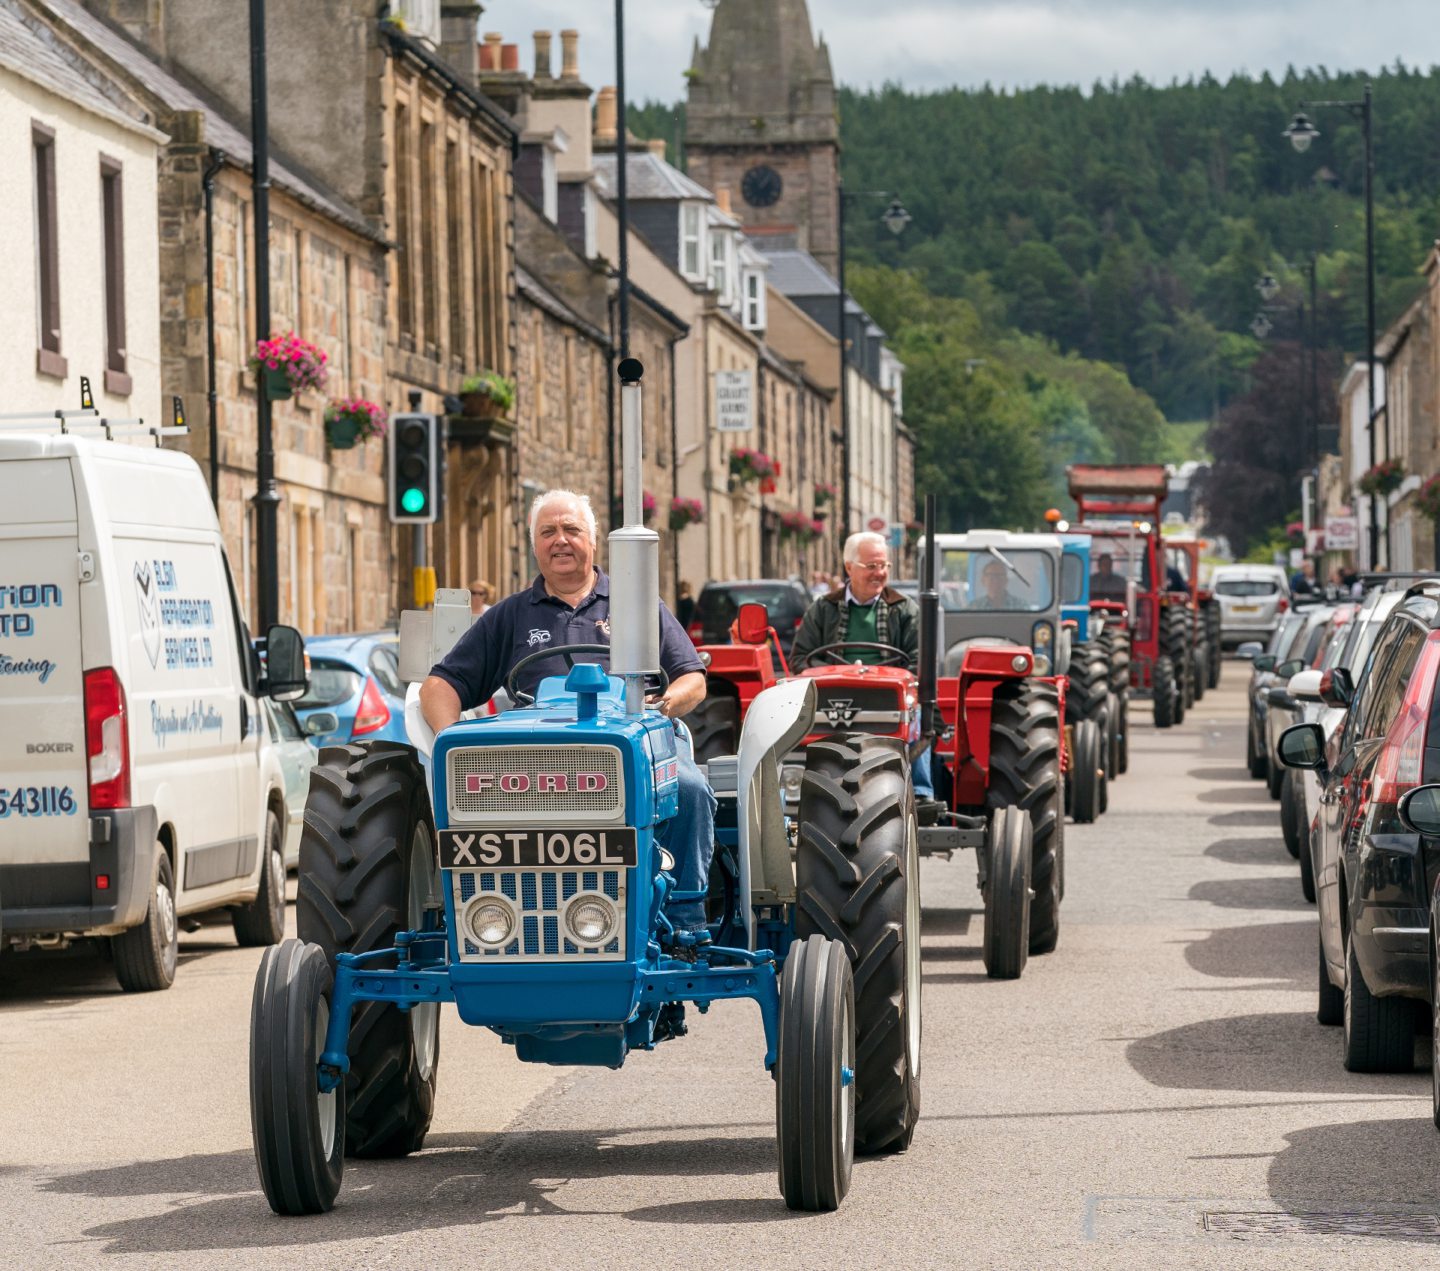 The tractor parade arrives in the Square, Fochabers